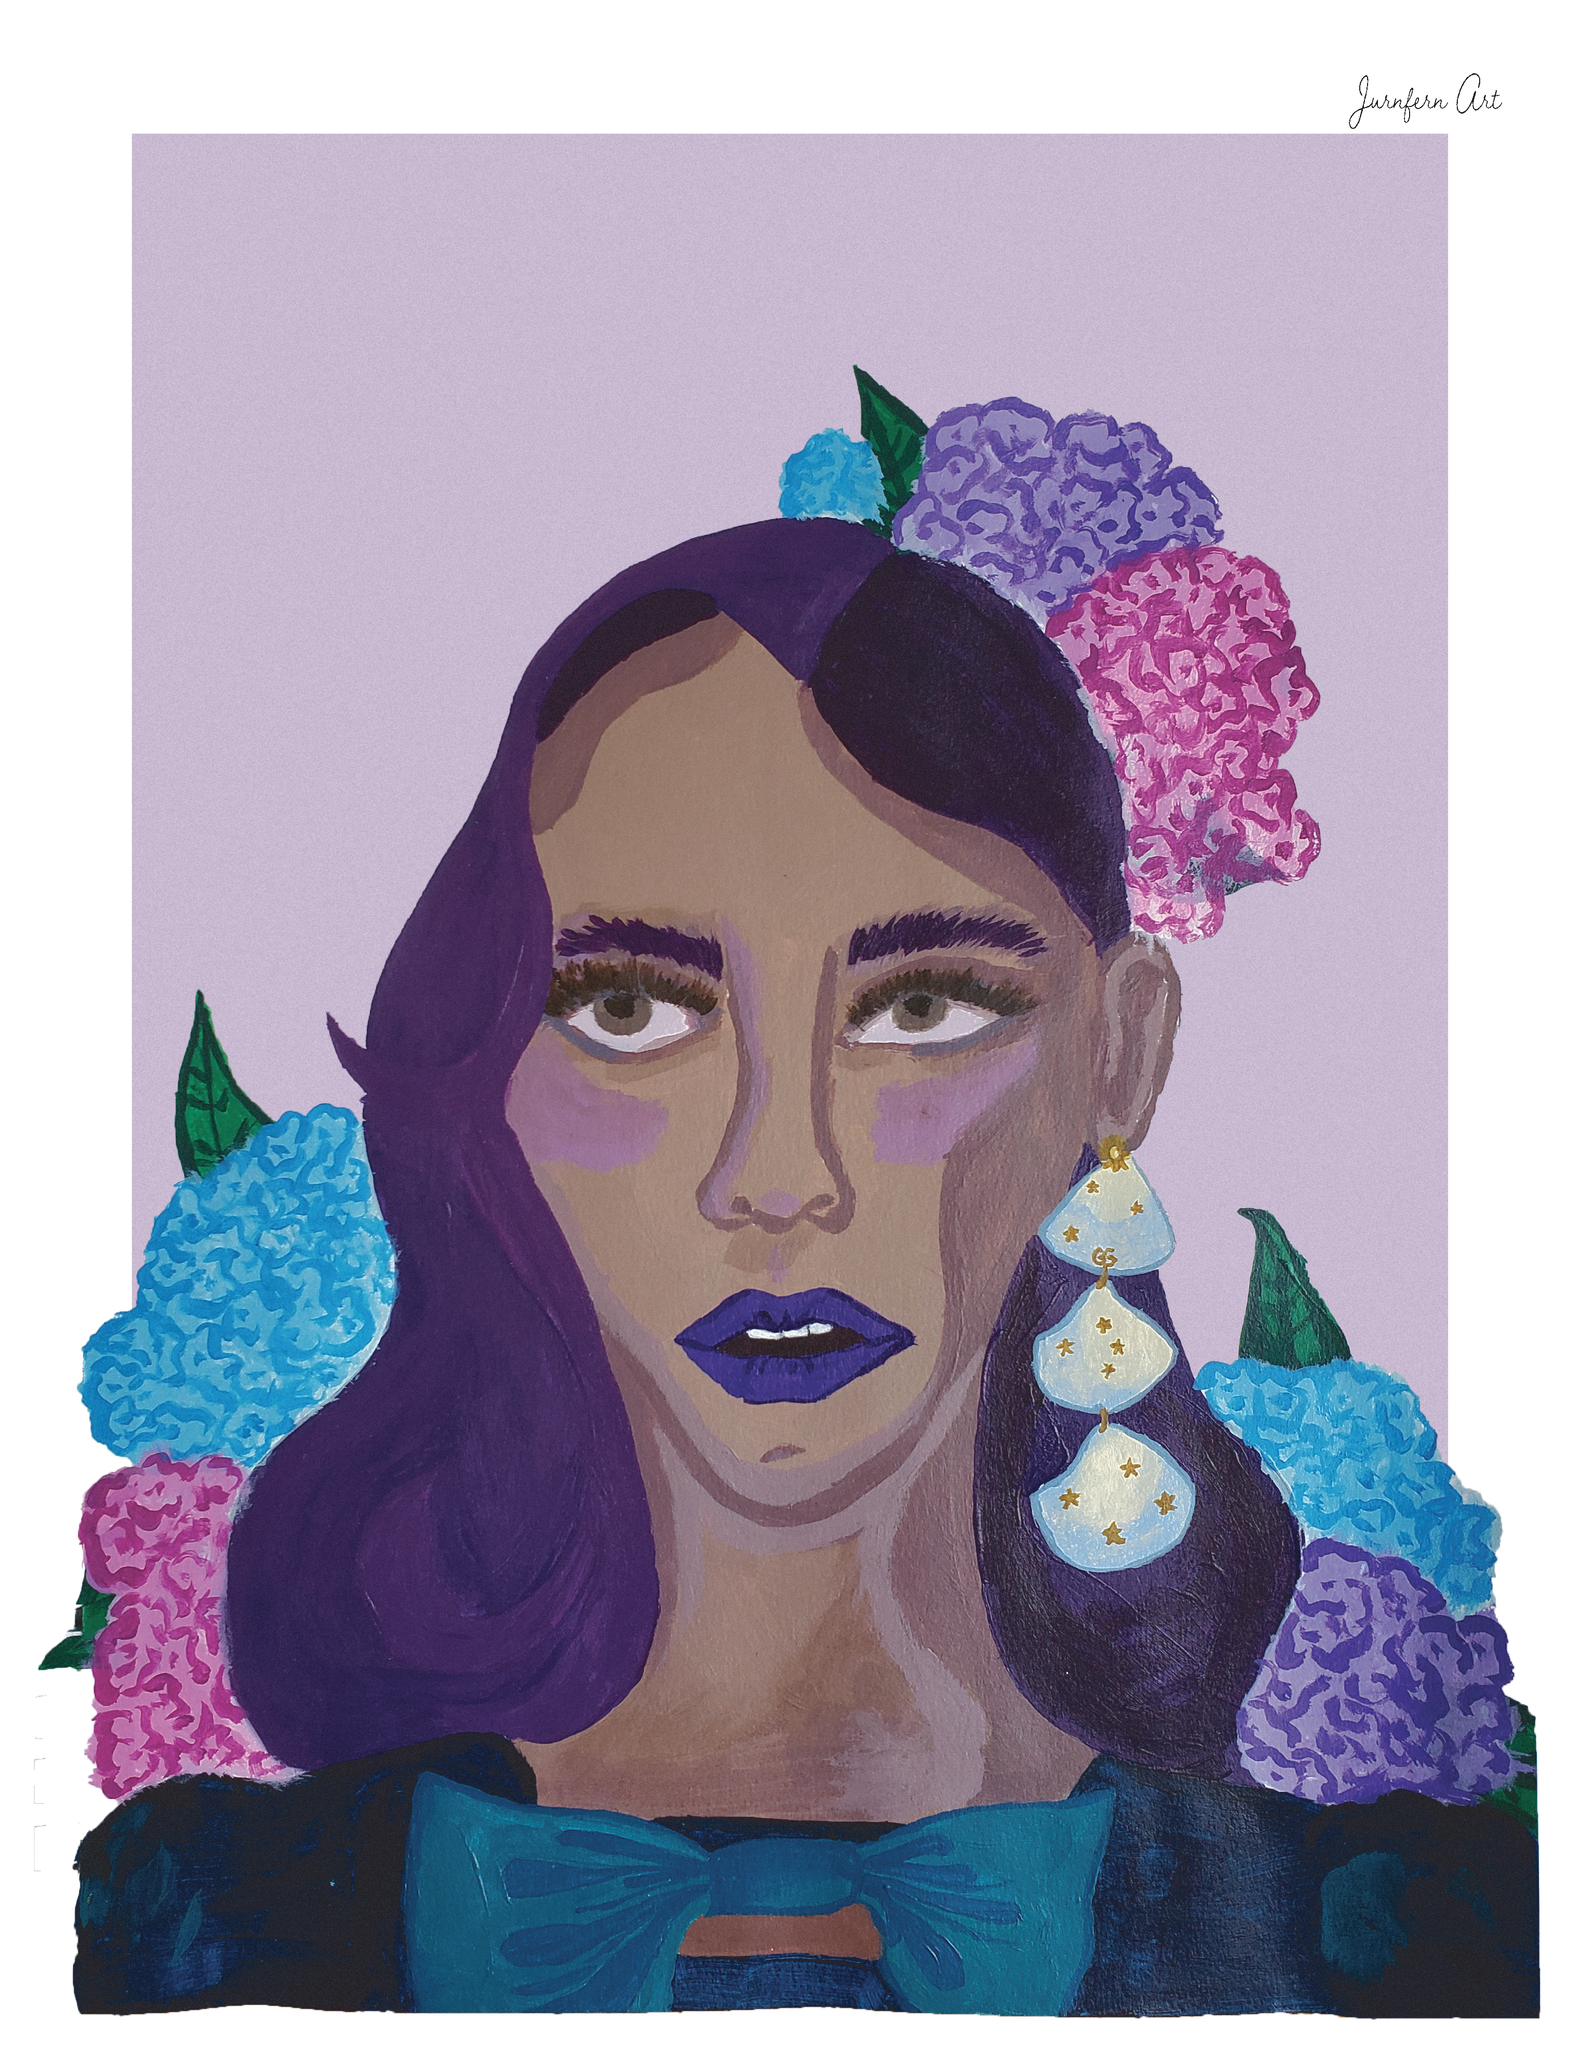 An illustration print of a portrait of a Black woman, painted in purple hues, wearing a blue velvet dress with a bow in the front and blue and pink hydrangeas in her hair